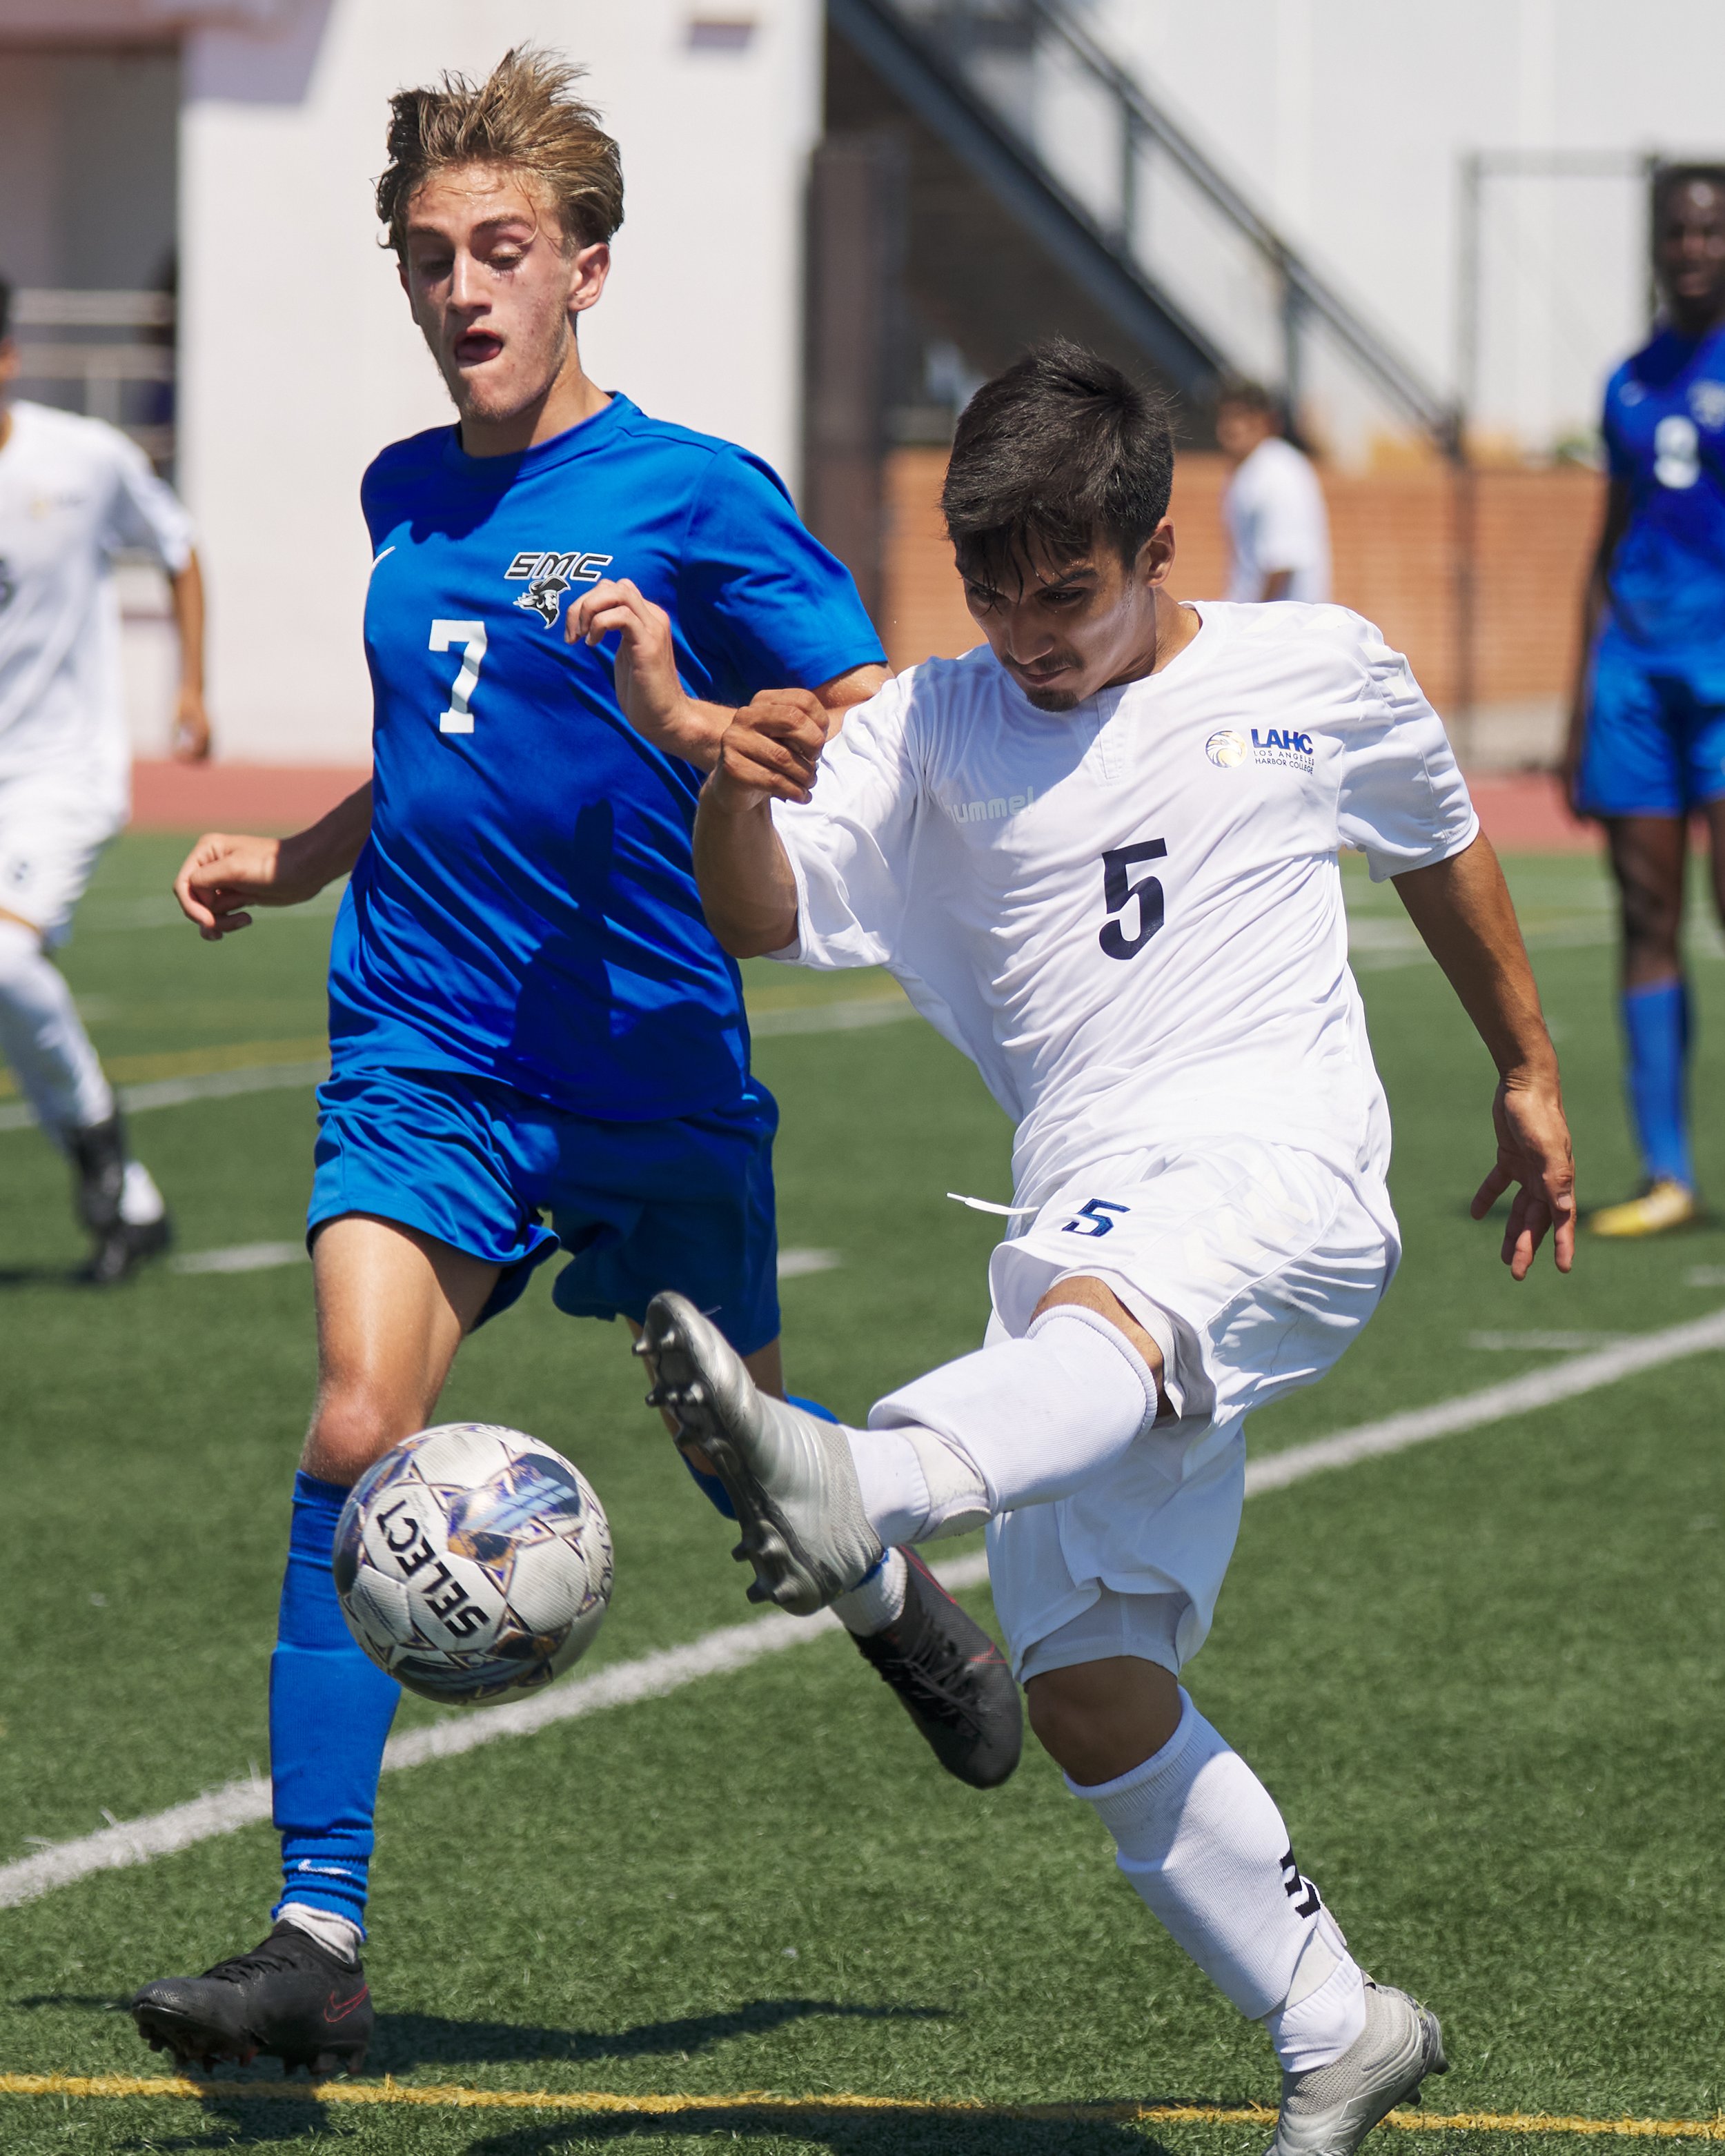  Los Angeles Harbor College Seahawks' Tommy Murillo (right) kicks the ball away from Santa Monica College Corsairs' Darren Lewis (left) during the men's soccer match on Friday, Sept. 9, 2023, at Corsair Field in Santa Monica, Calif. The Corsairs won 